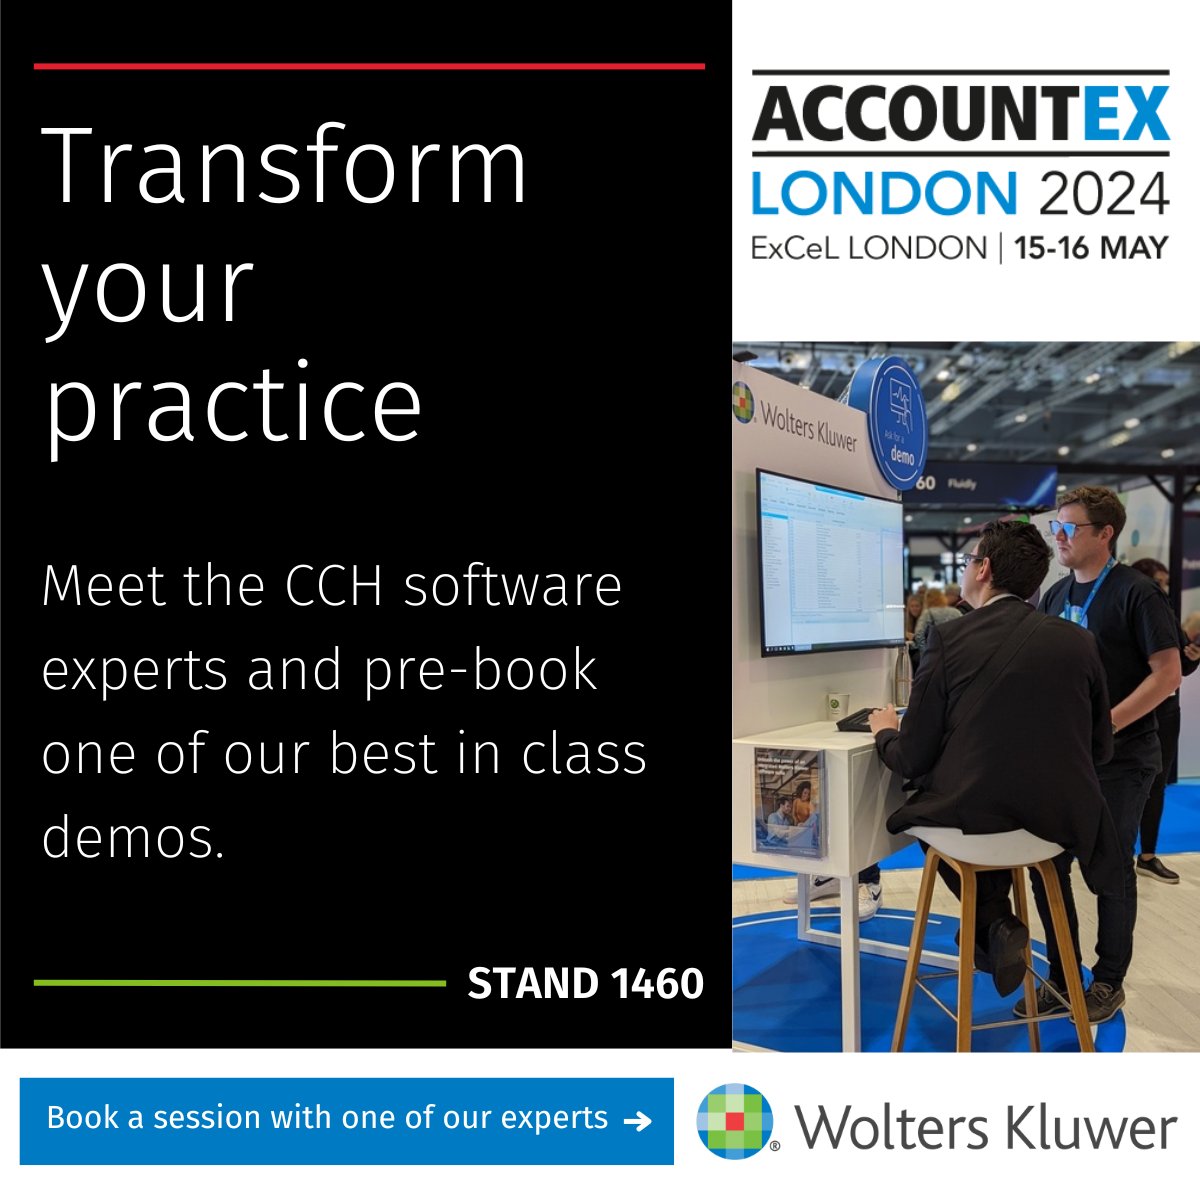 We’re just two days away from [@Accountex] 2024, and we couldn’t be more excited! We’re keen to see faces both familiar and new, so don’t be afraid to swing by and speak to our experts. Pre-book a demo today: wolterskluwer.com/en-gb/know/acc… #Accountex2024 #WoltersKluwer #CCHiFirm #AML